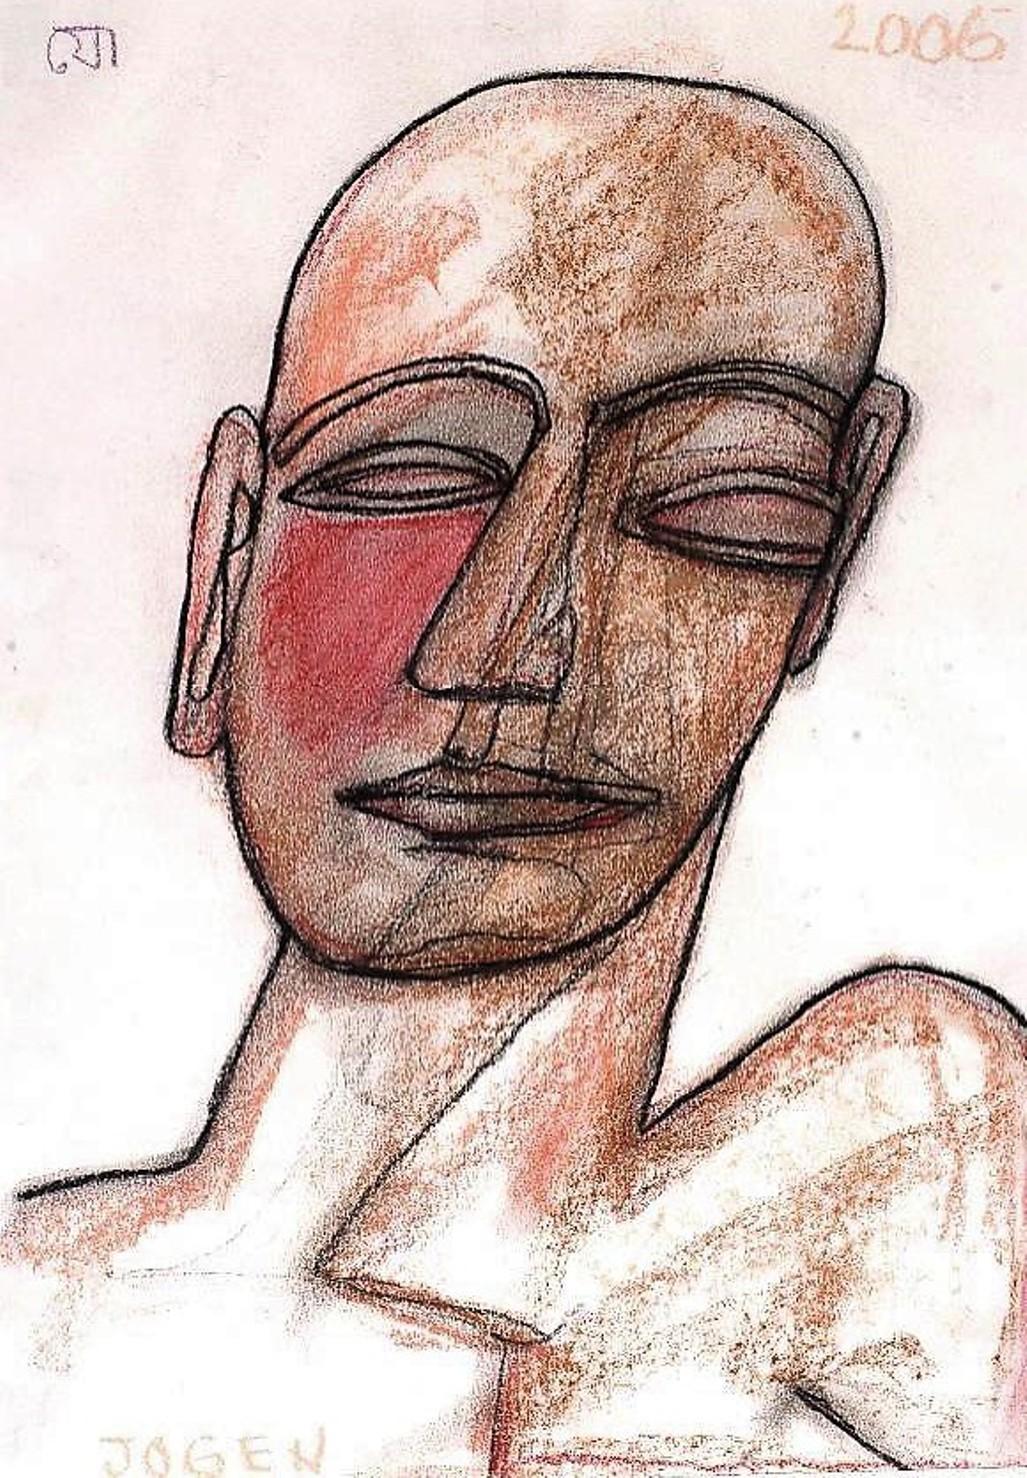 Untitled, Mixed Media on Paper by Modern Indian Artist Jogen Chowdhury"In Stock" - Mixed Media Art by Jogen Chowdhury 